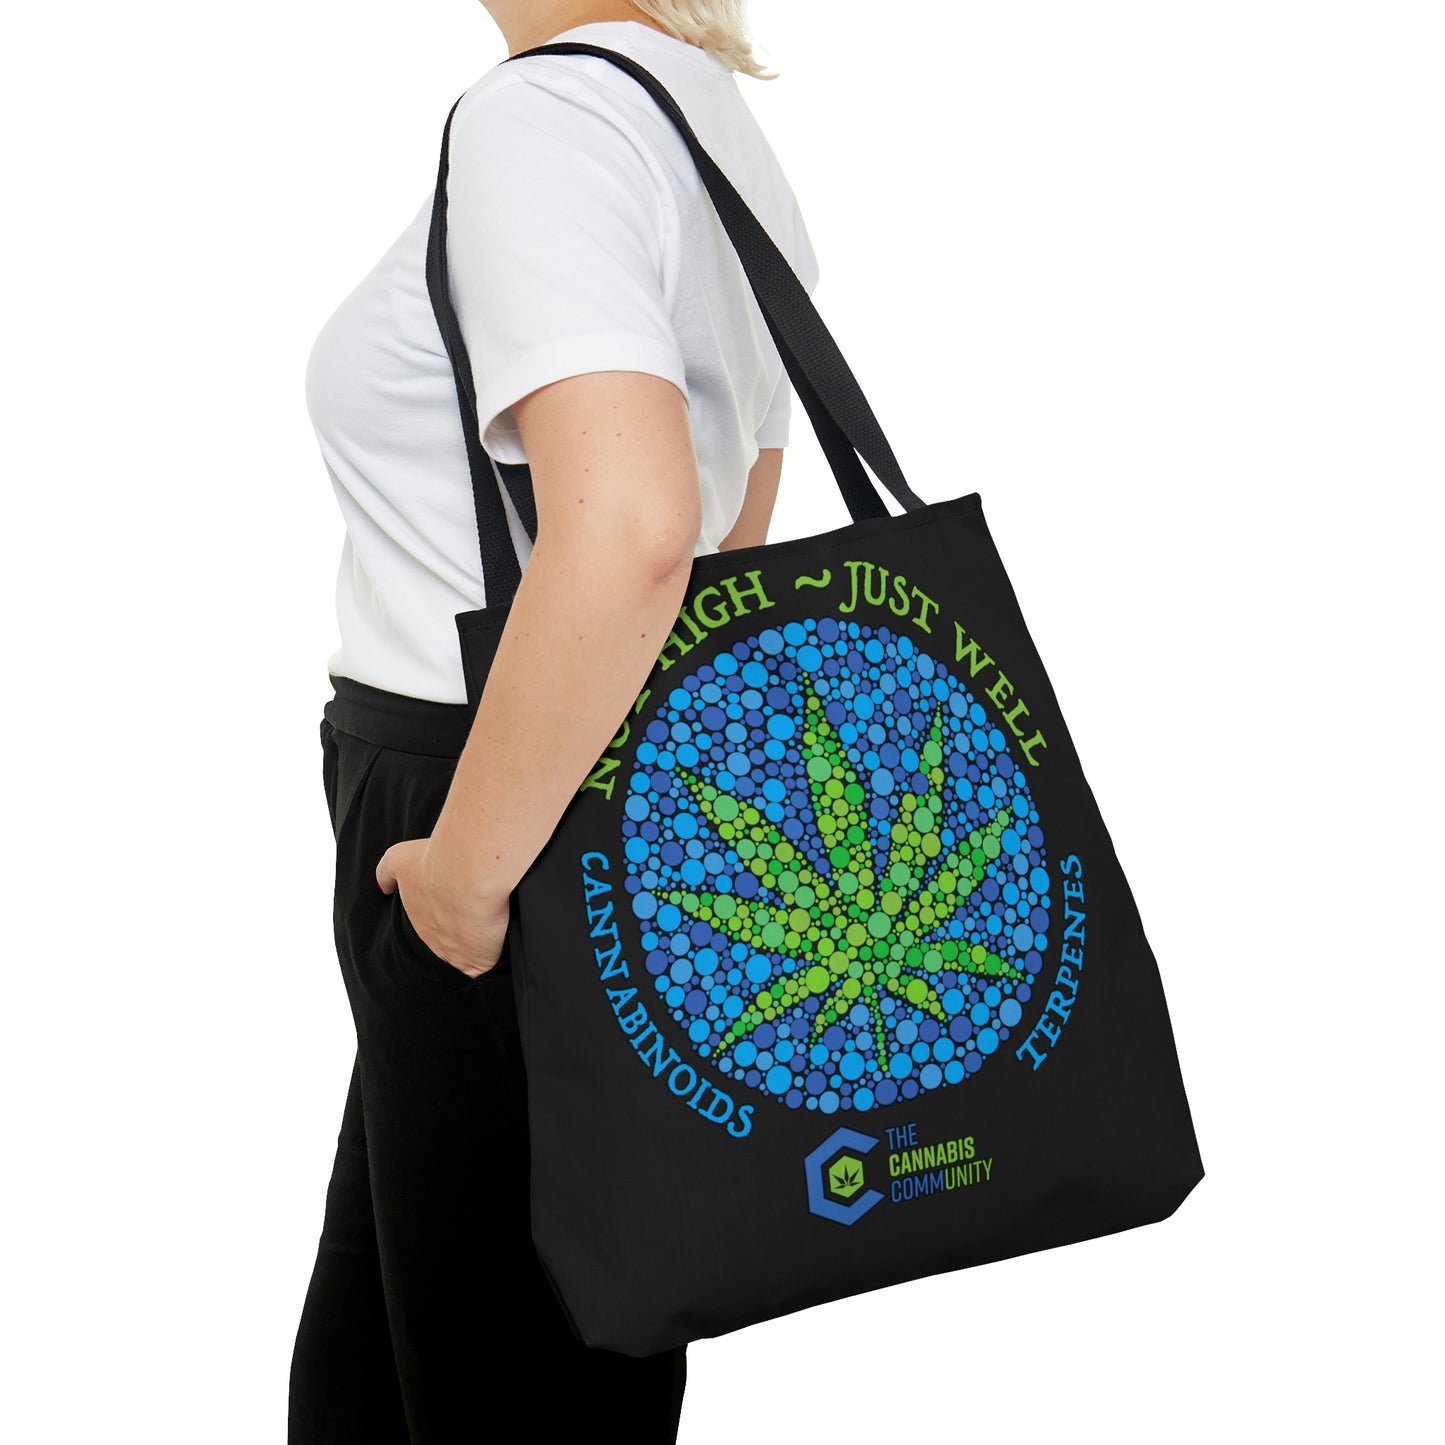 A woman is wearing the black Not High, Just Well Medical Cannabis Tote Bag